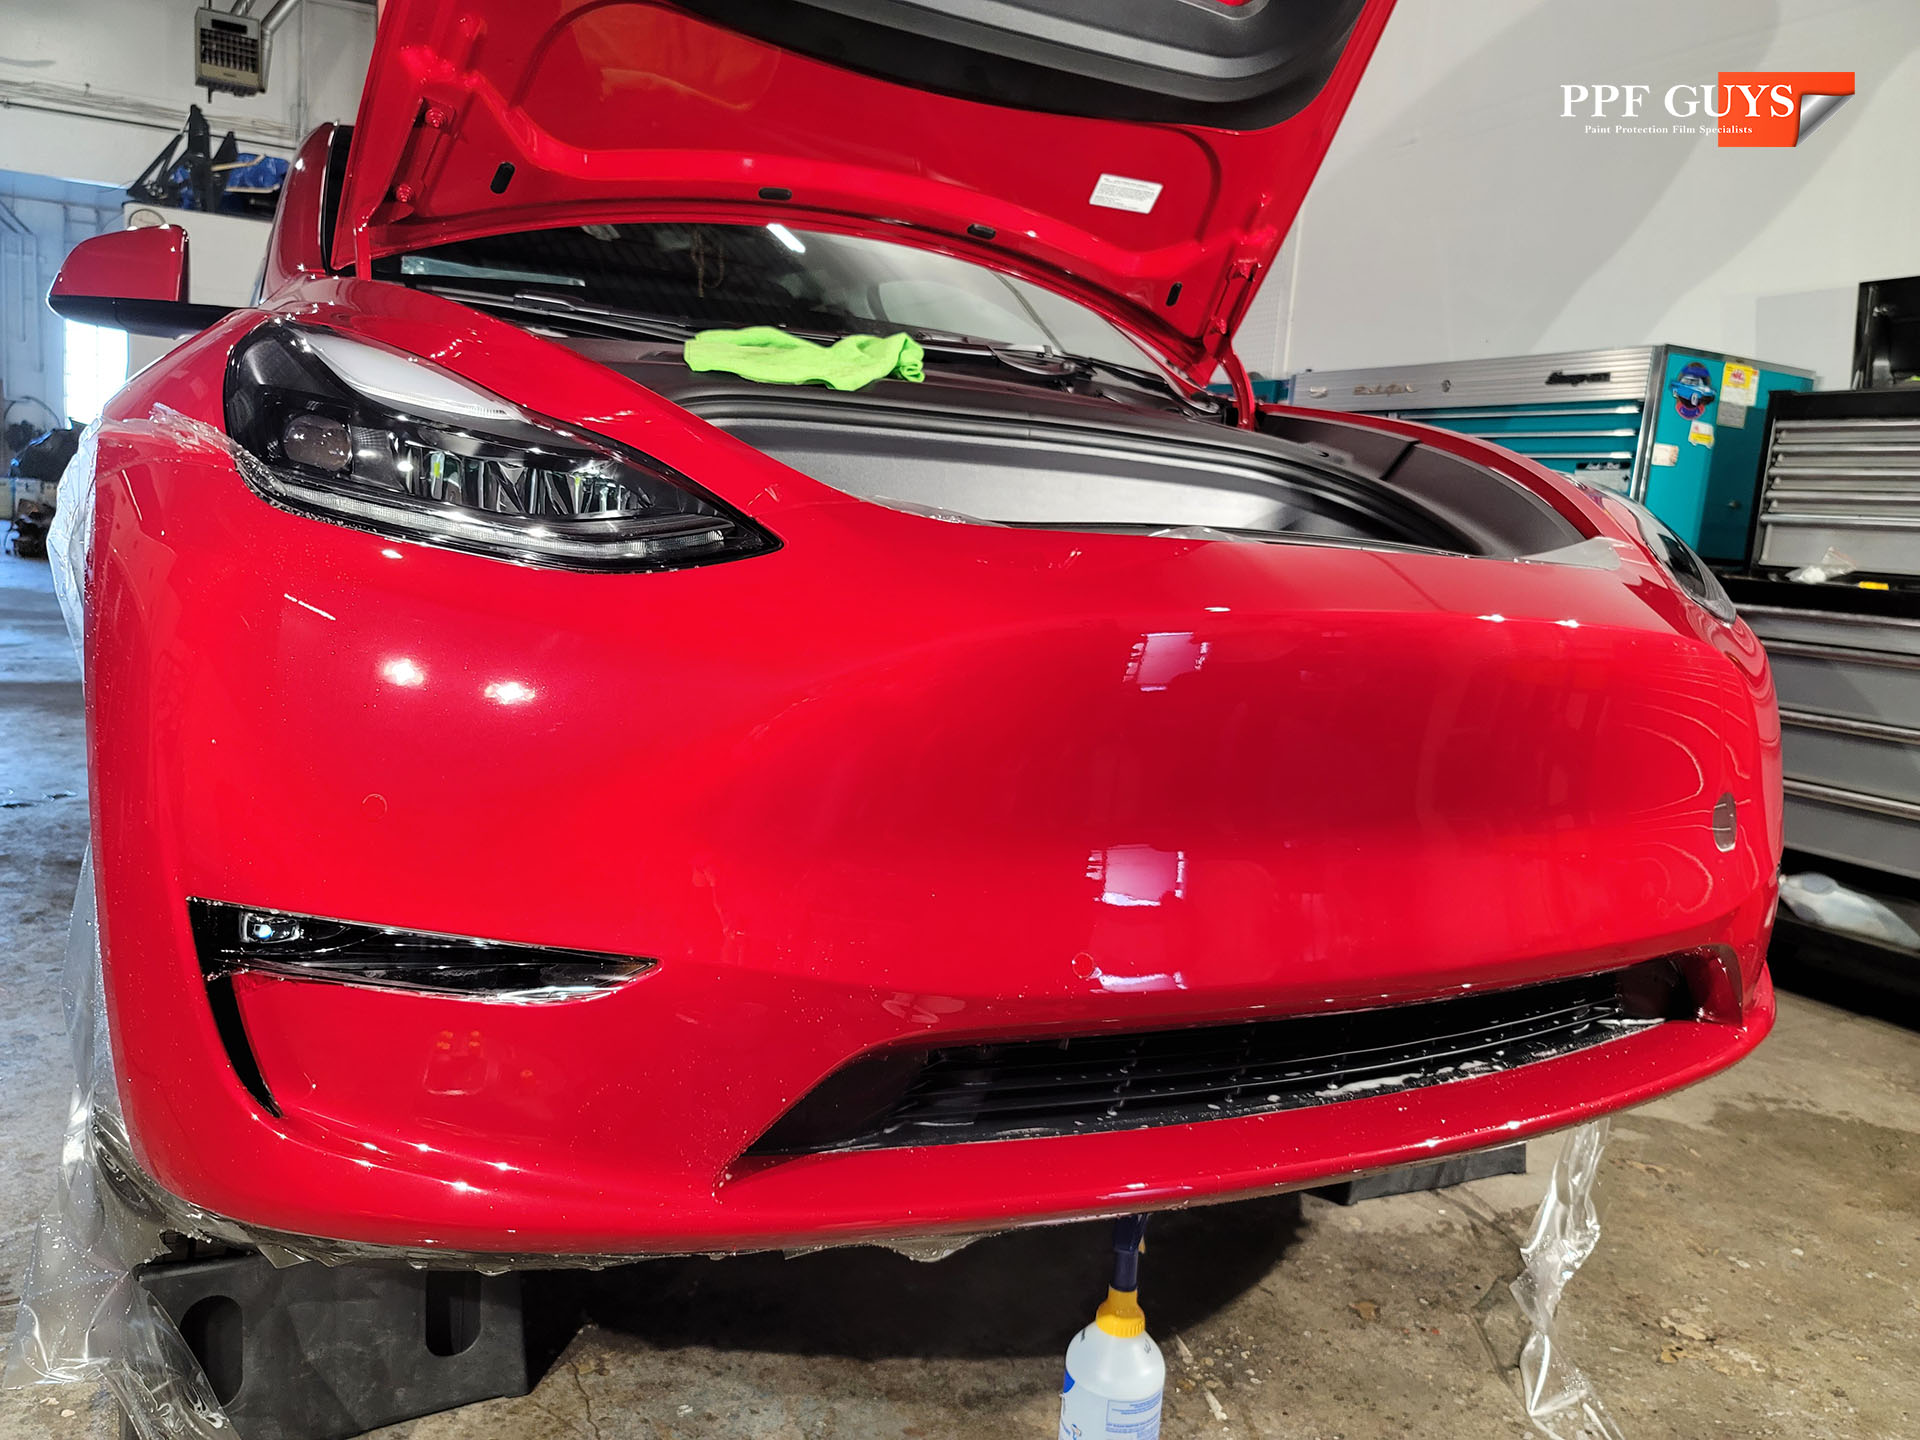 ppf guys model y p full xpel ultimate fusion (2).jpg